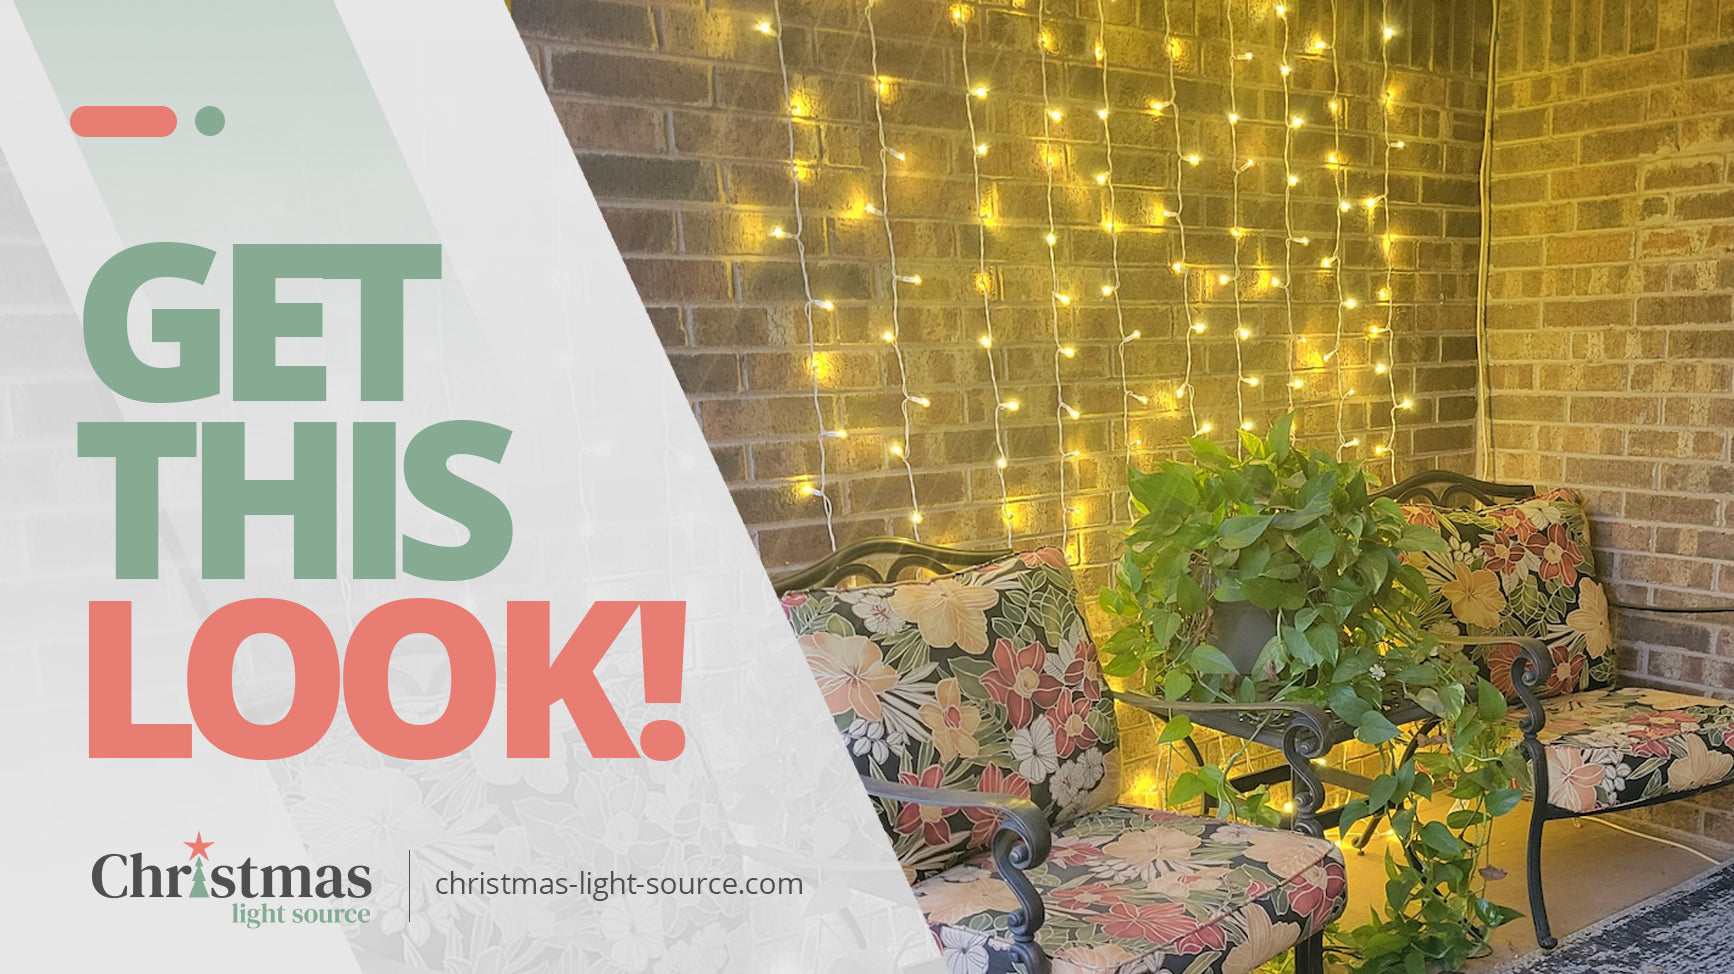 Get this Look: Lights for a backyard party